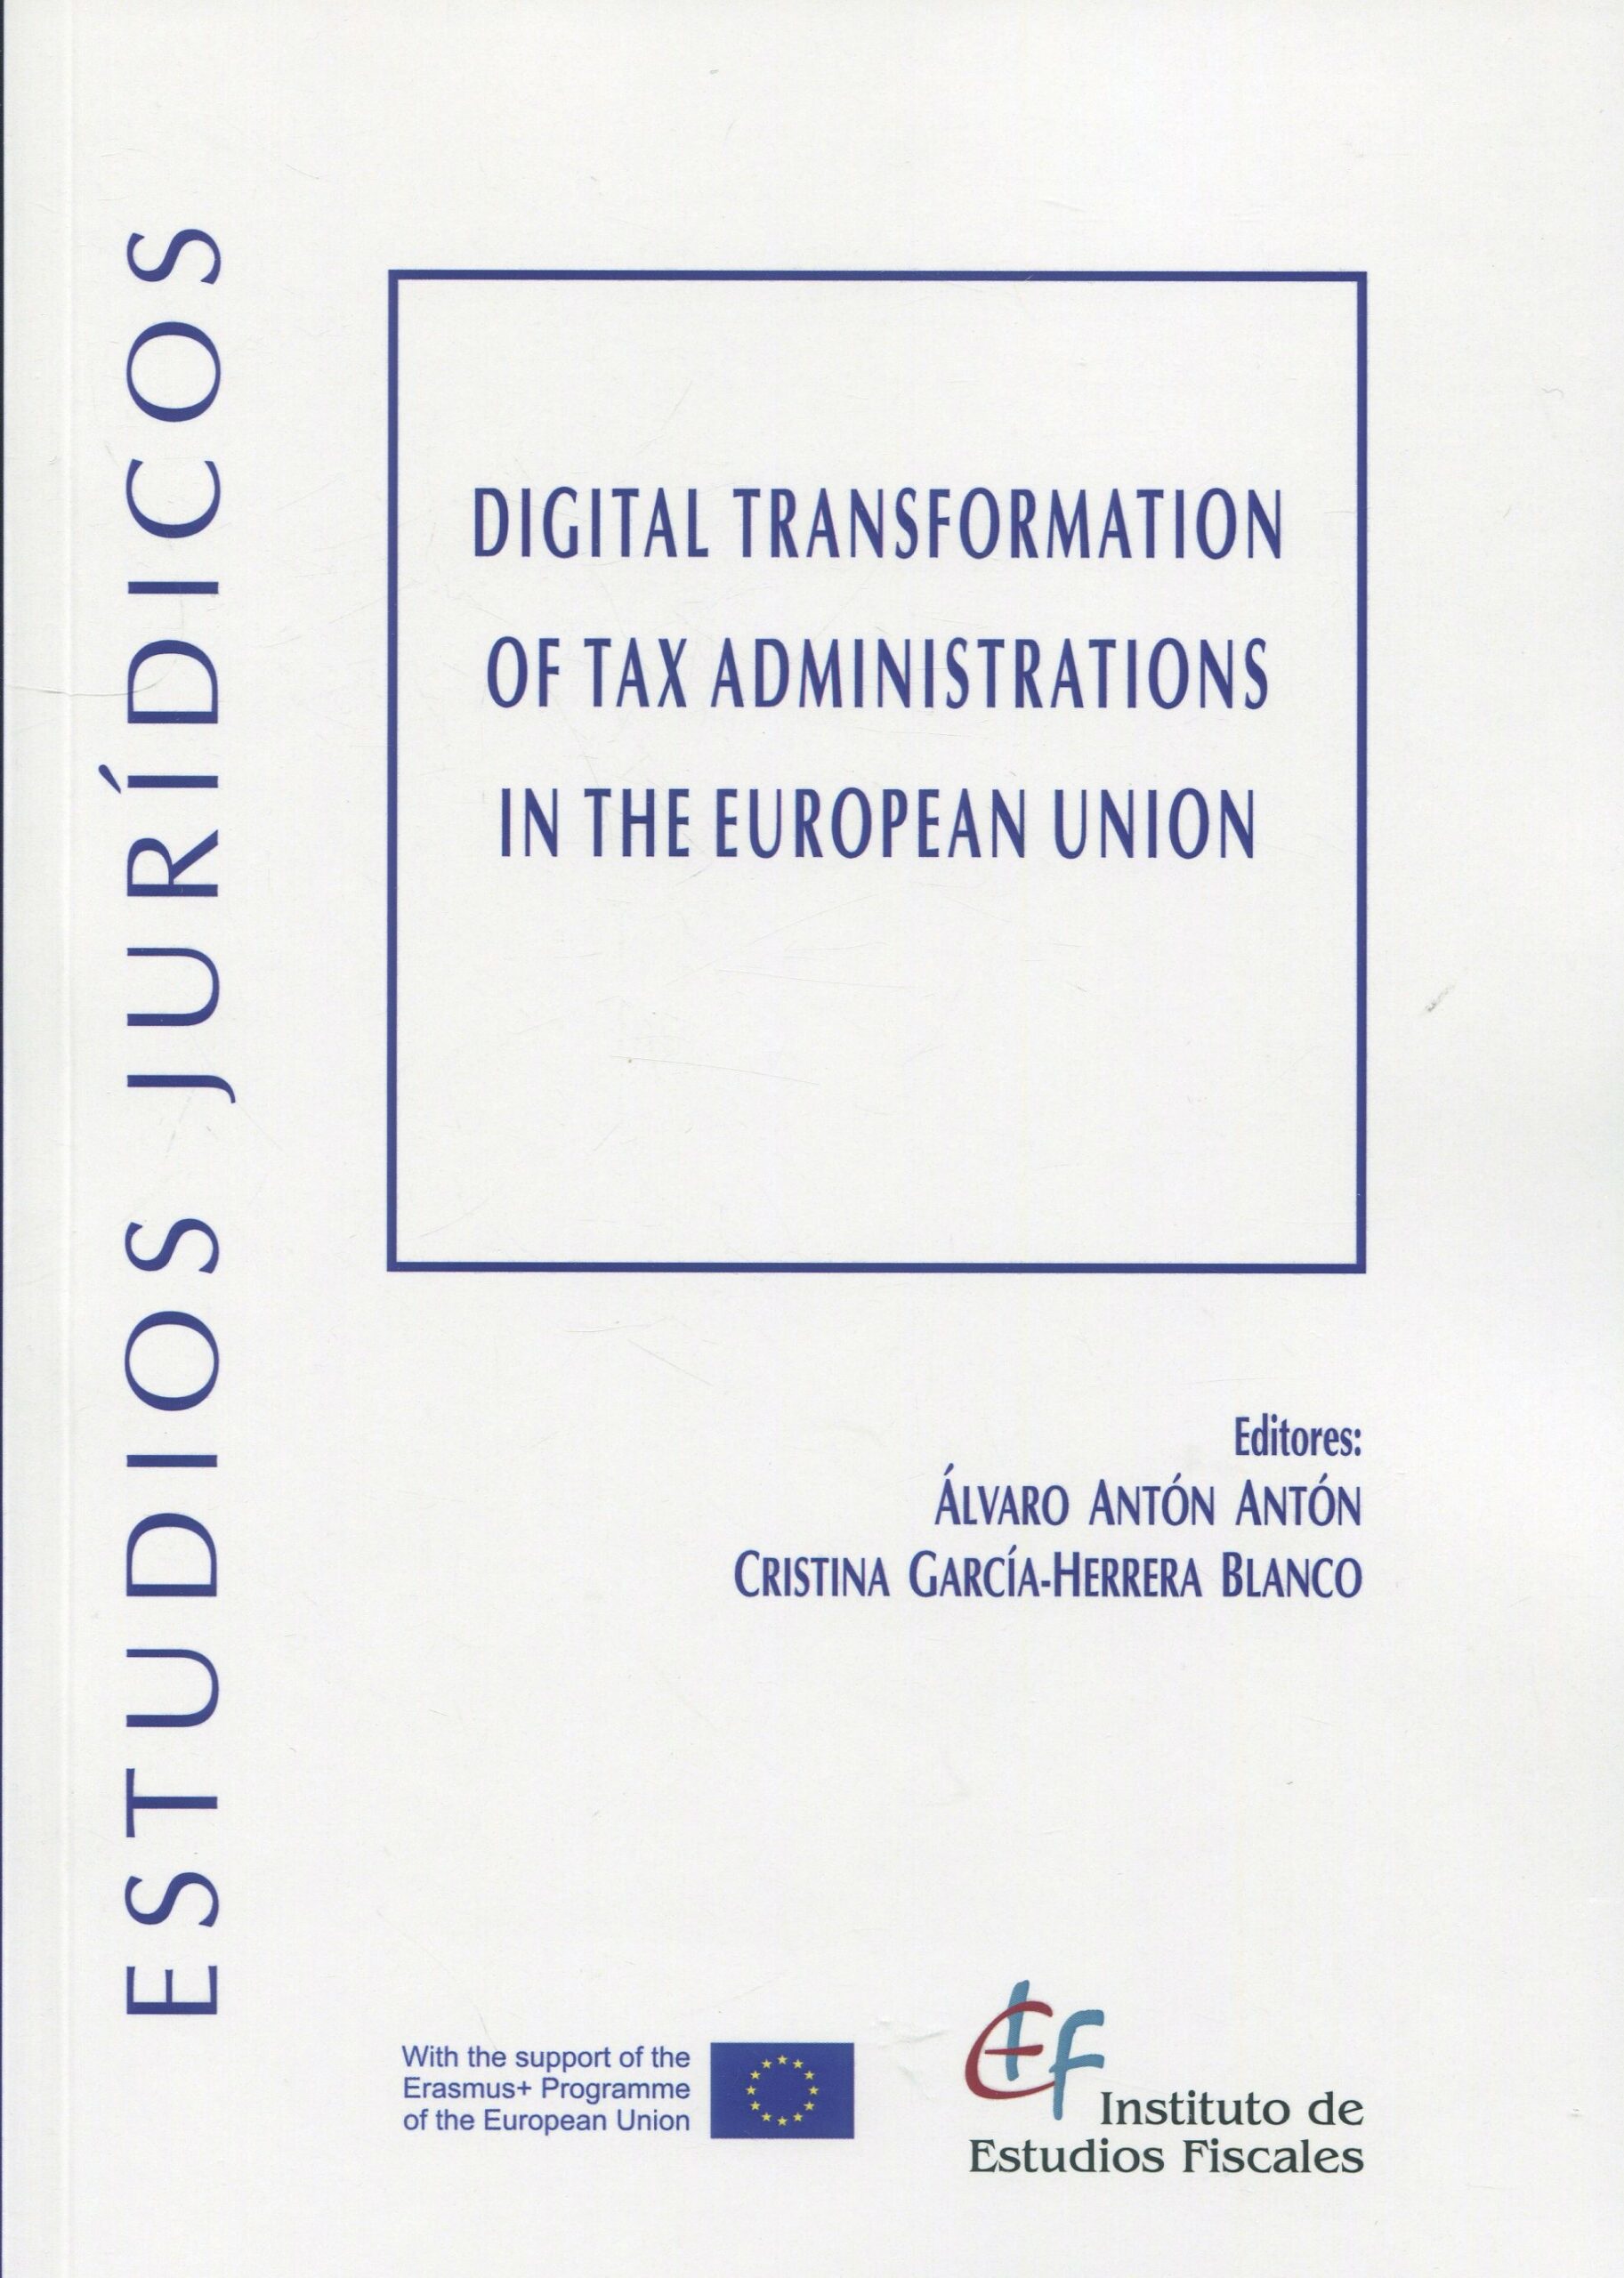 Digital transformation of tax administrations in the European Union